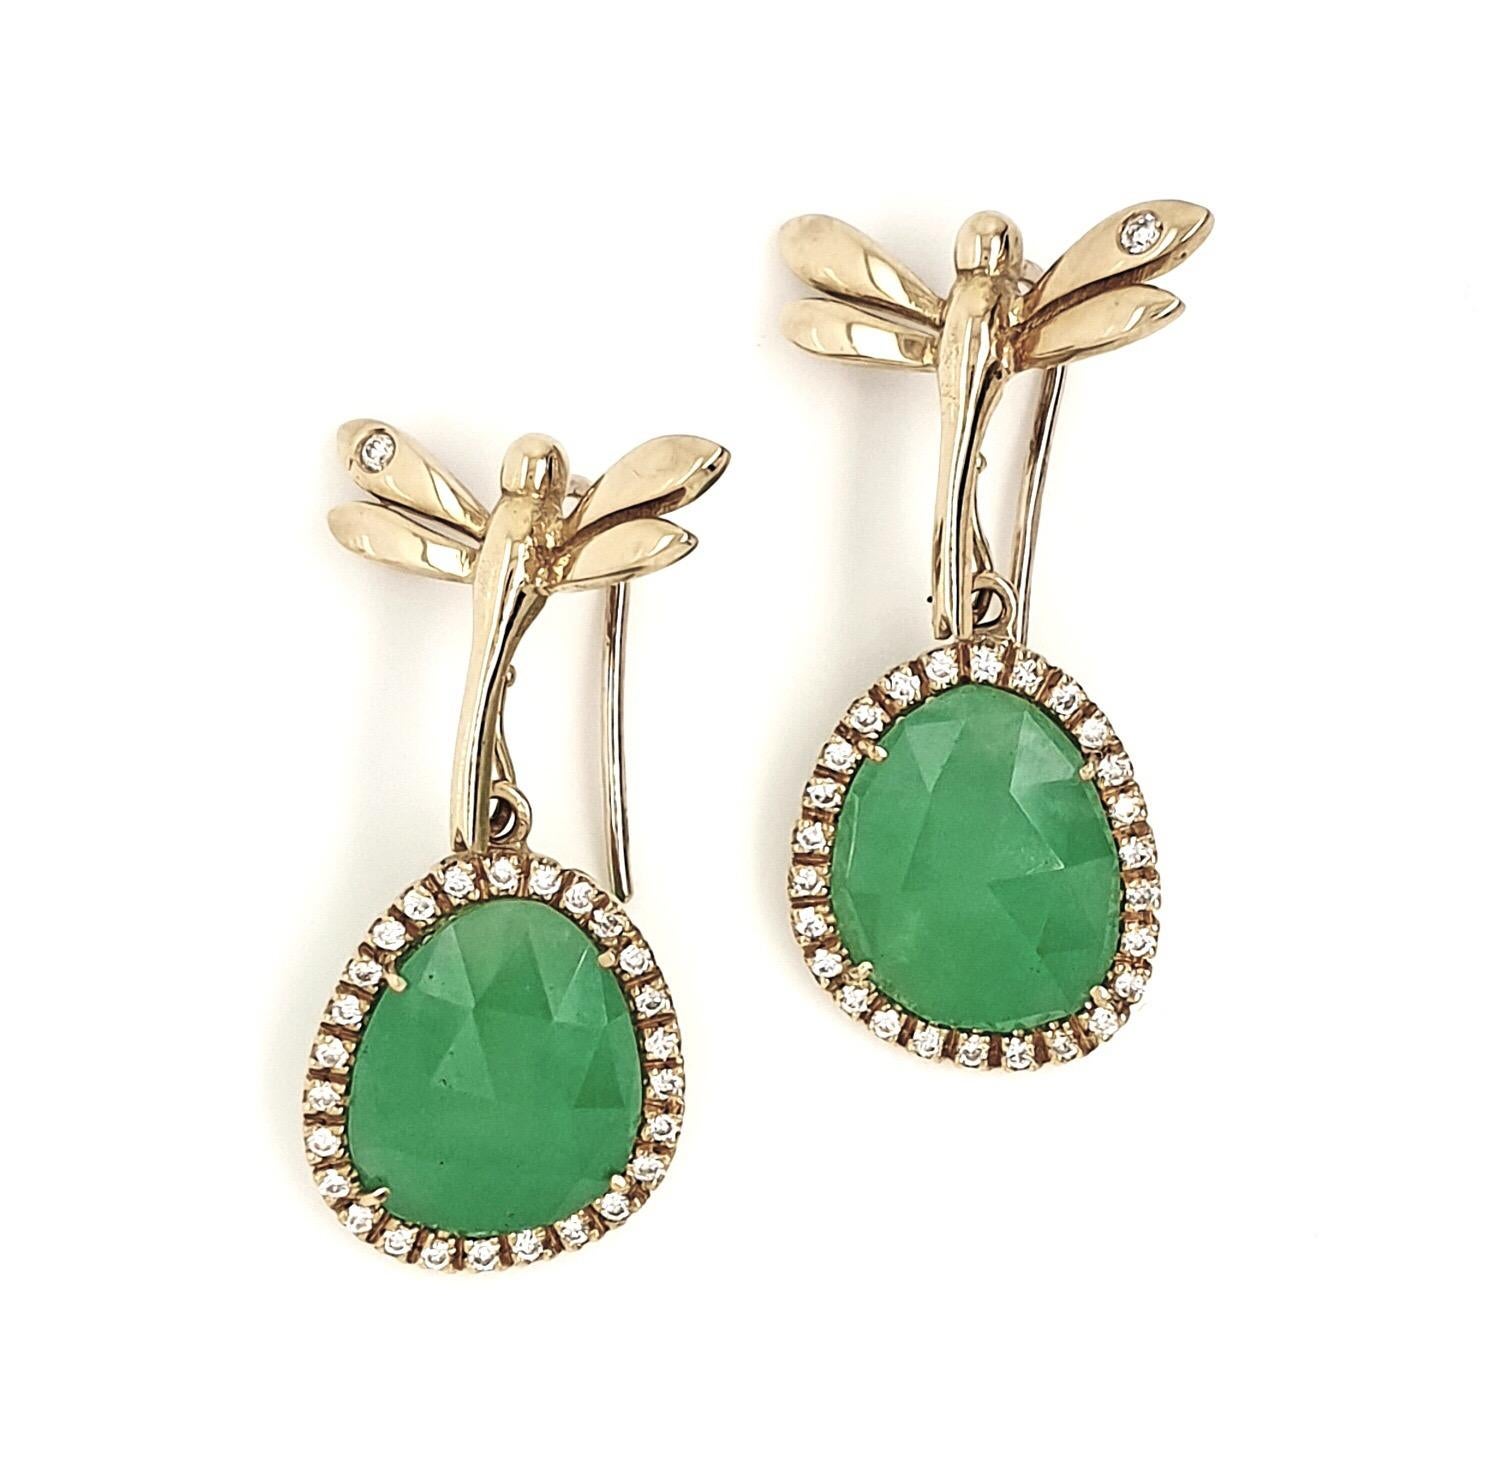 Contemporary 18 Karat Gold Convertible Bright Jade Earrings with Dragonfly In New Condition For Sale In Palermo, Italy PA